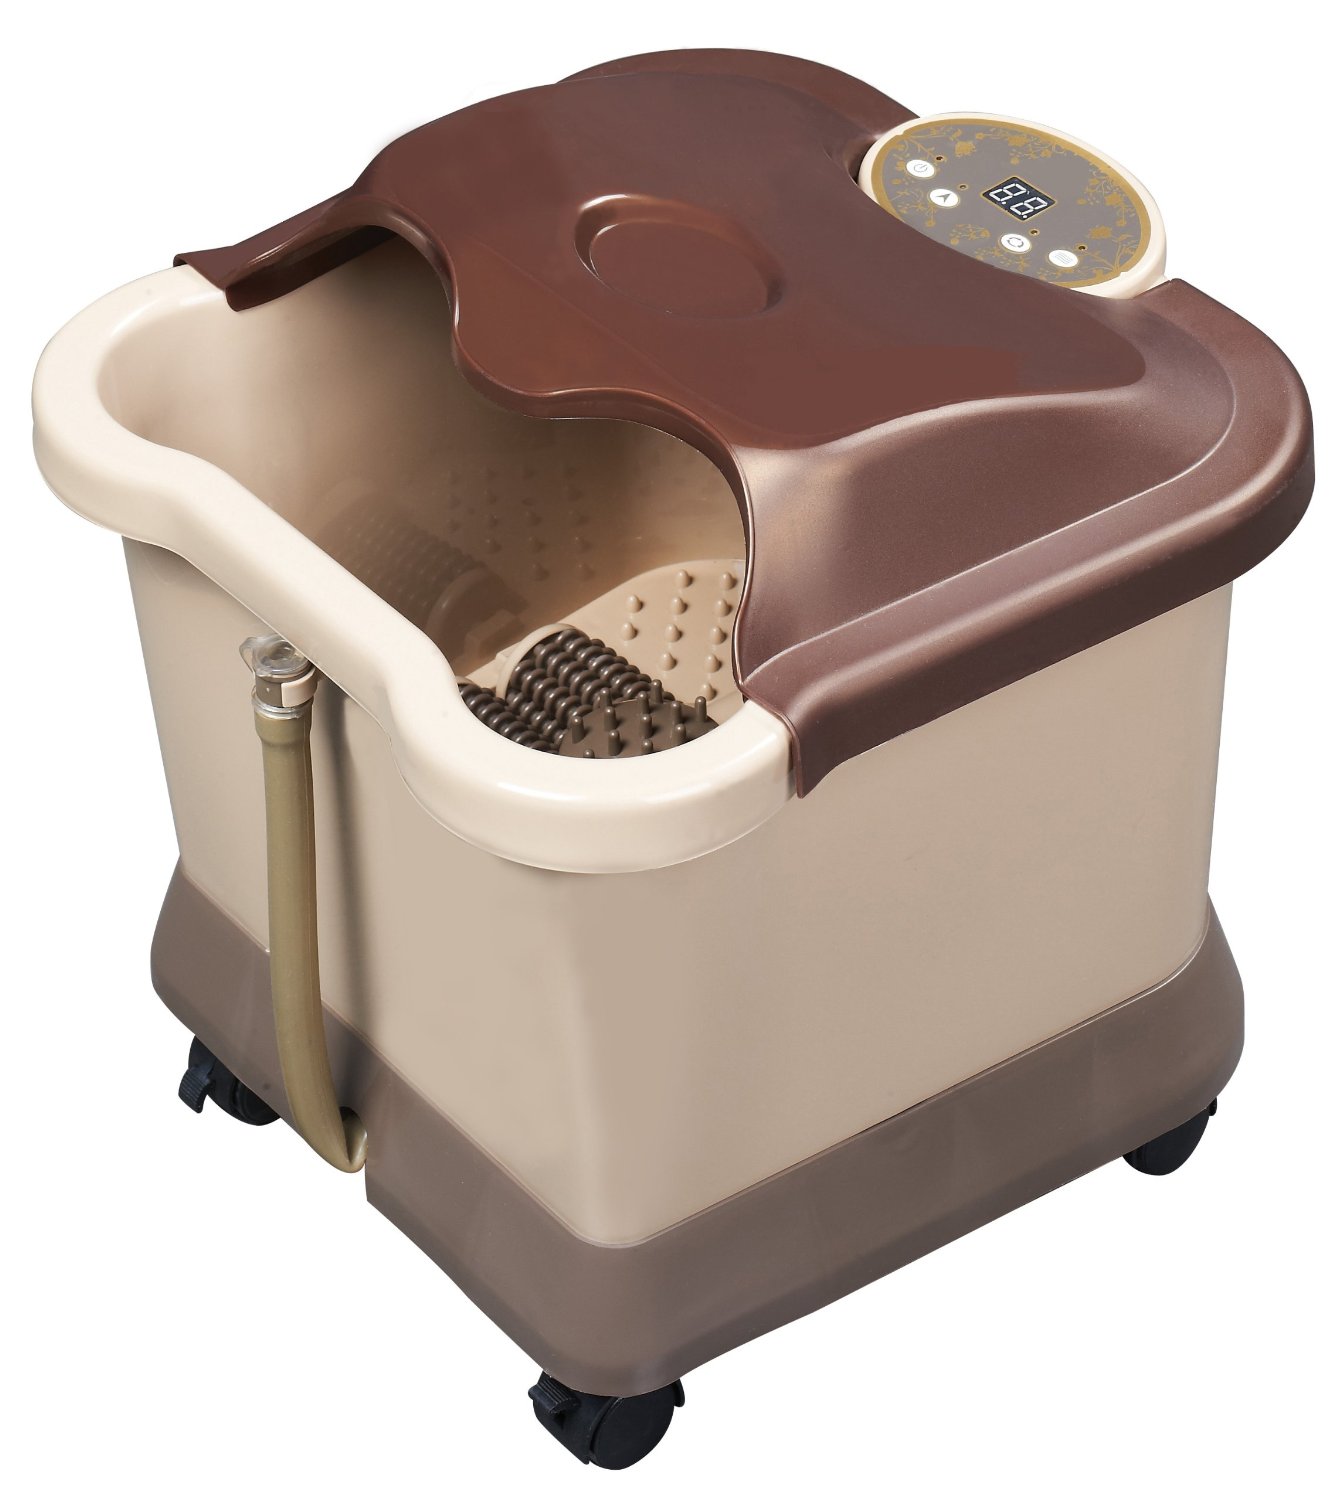 Carepeutic Deluxe Motorized Foot and Leg Spa Bath Massager